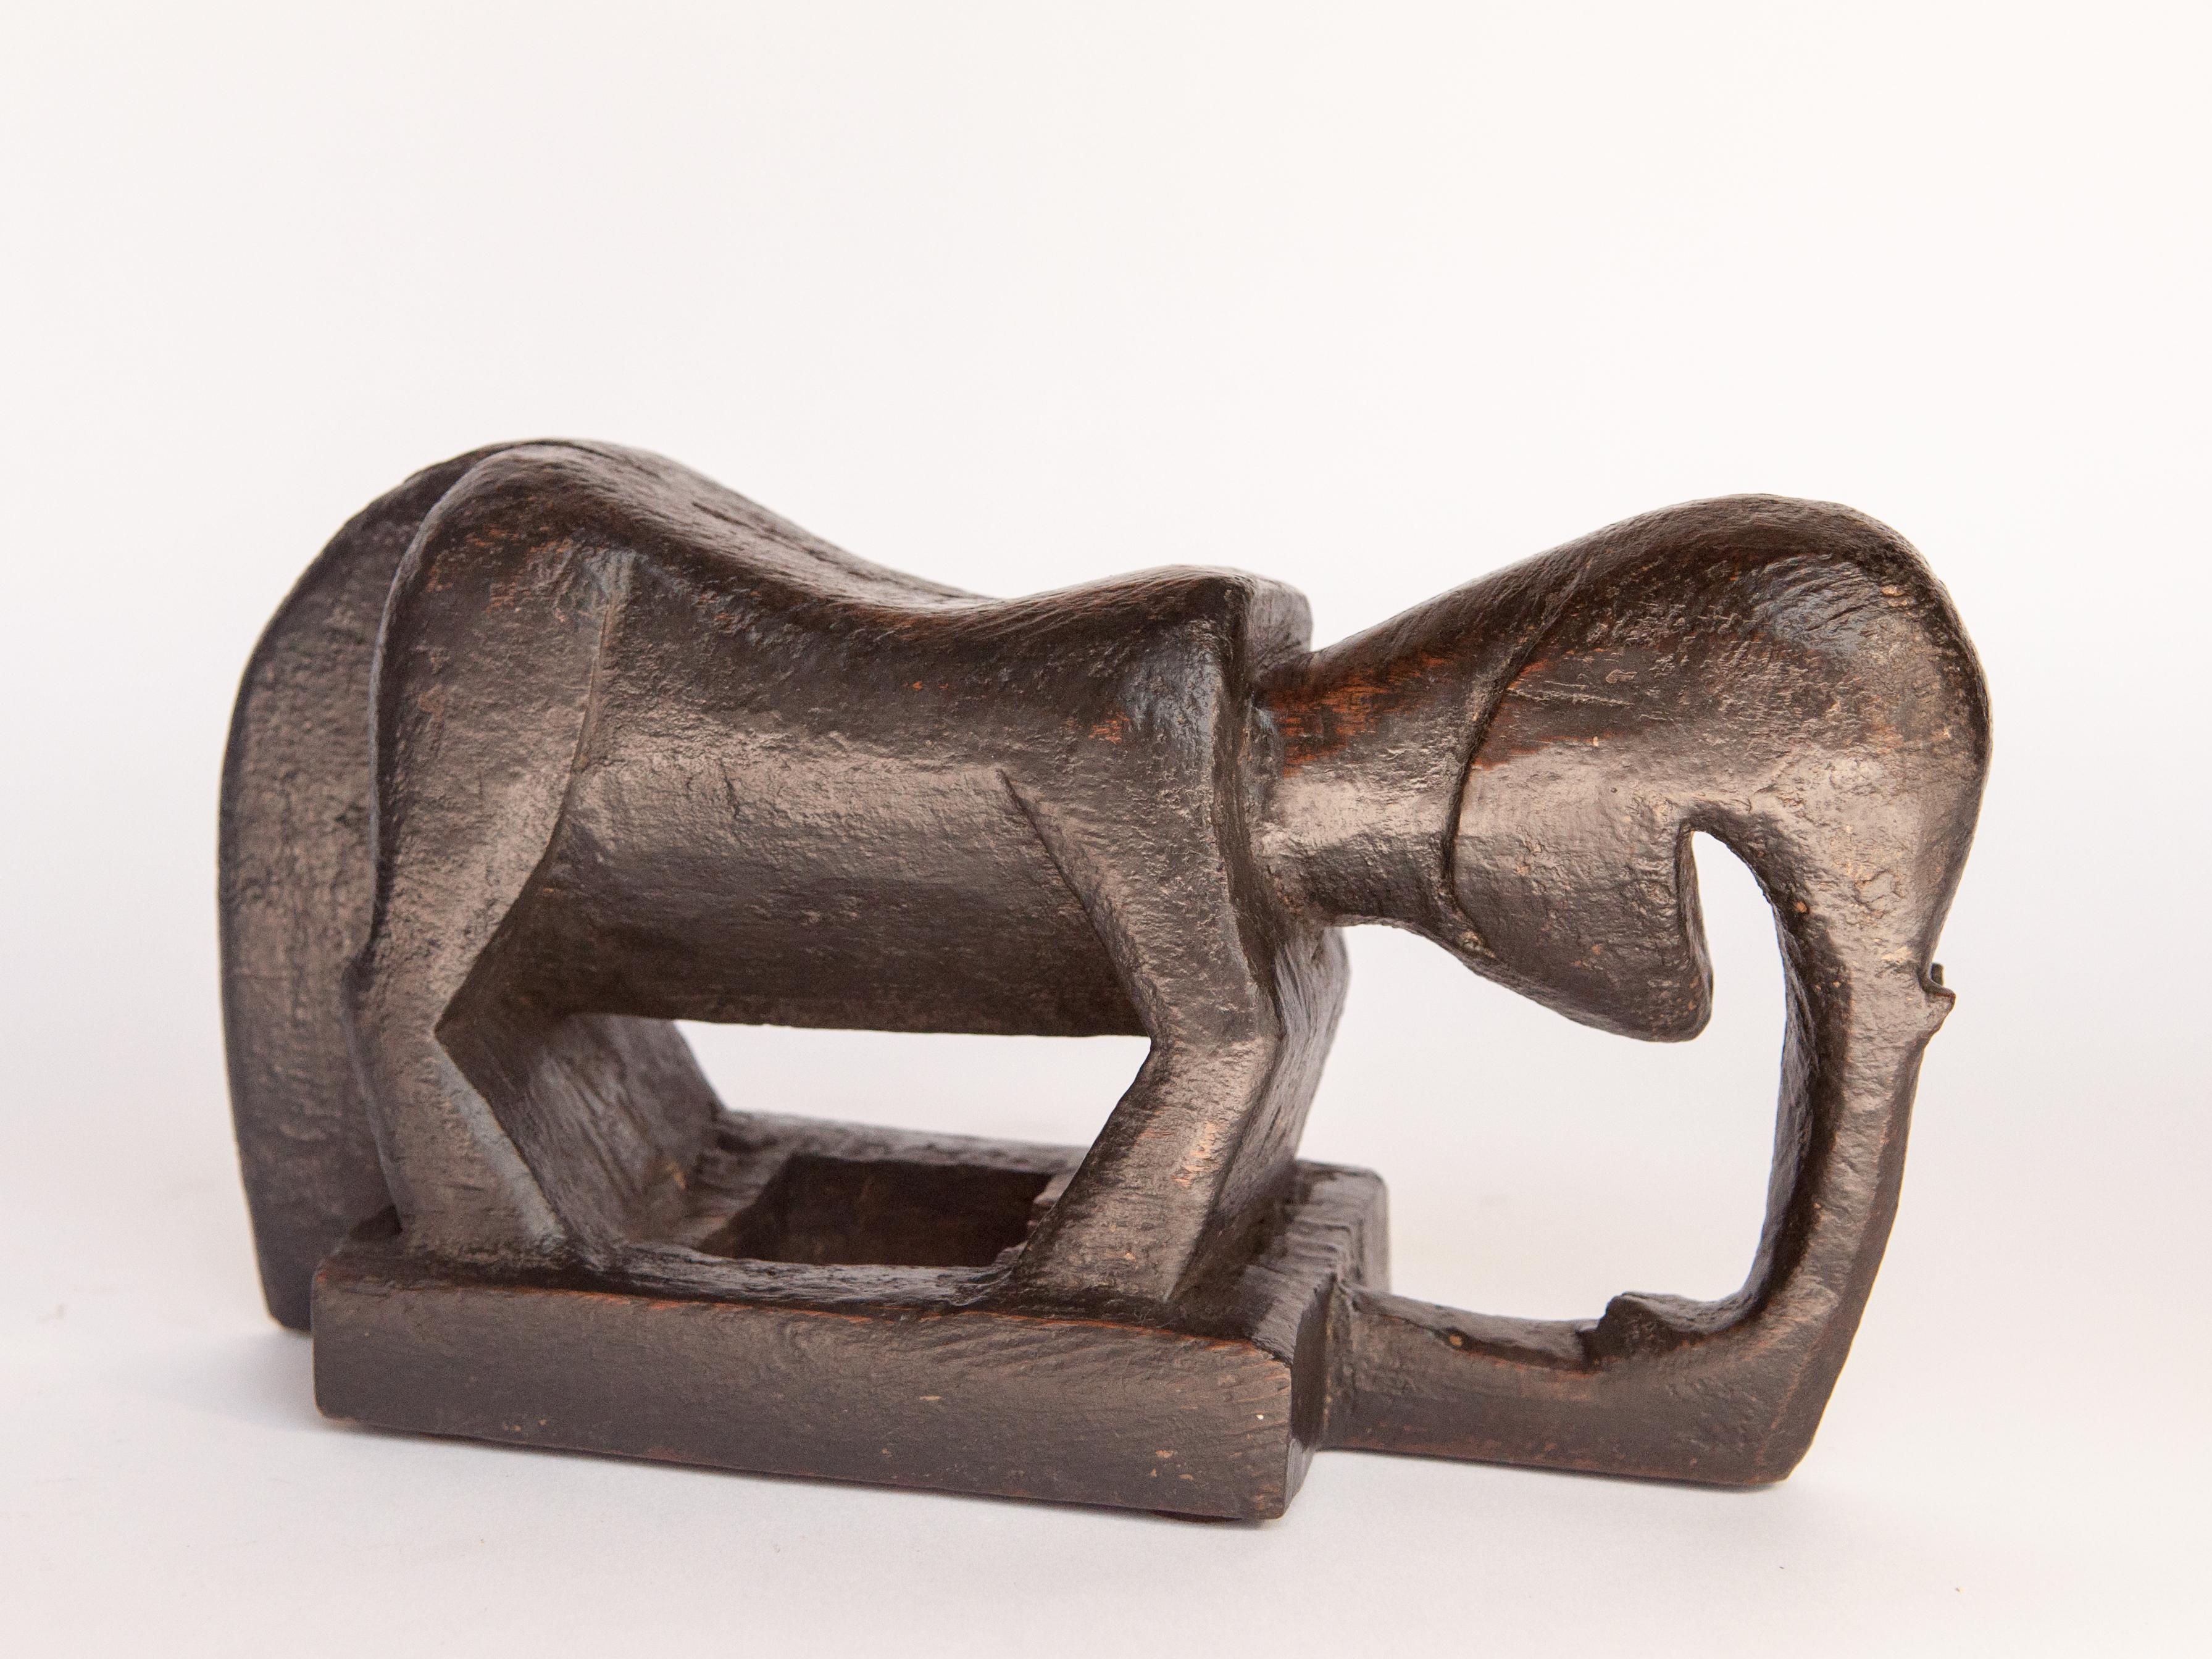 Hand-Carved Old Wooden Staff Carving, Stylized Elephant Motif, Tharu Nepal, Mid-20th Century